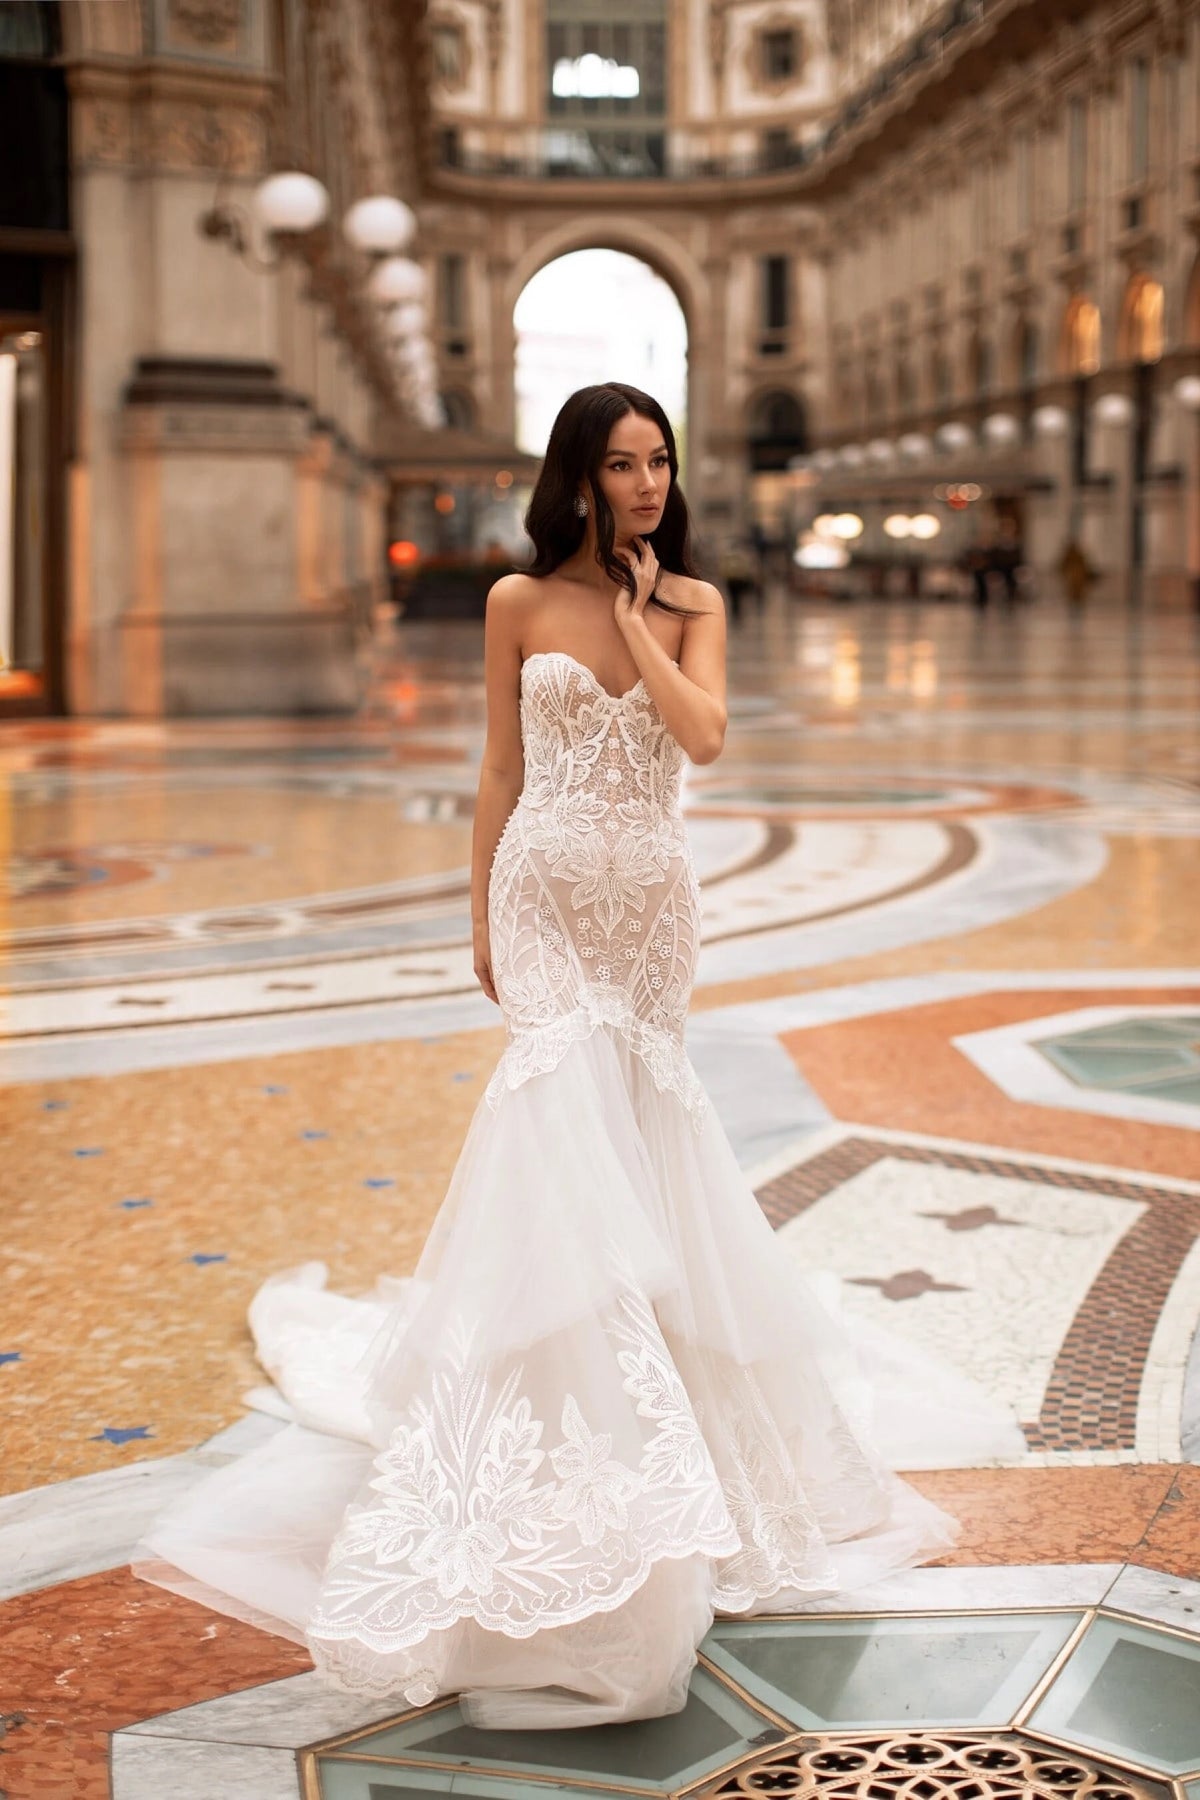 Stunning Floral Embrodery Lace Fitted Sleeveless Strapless Sweetheart neckline Mermaid Wedding Dress Bridal Gown Sexy Design with Train